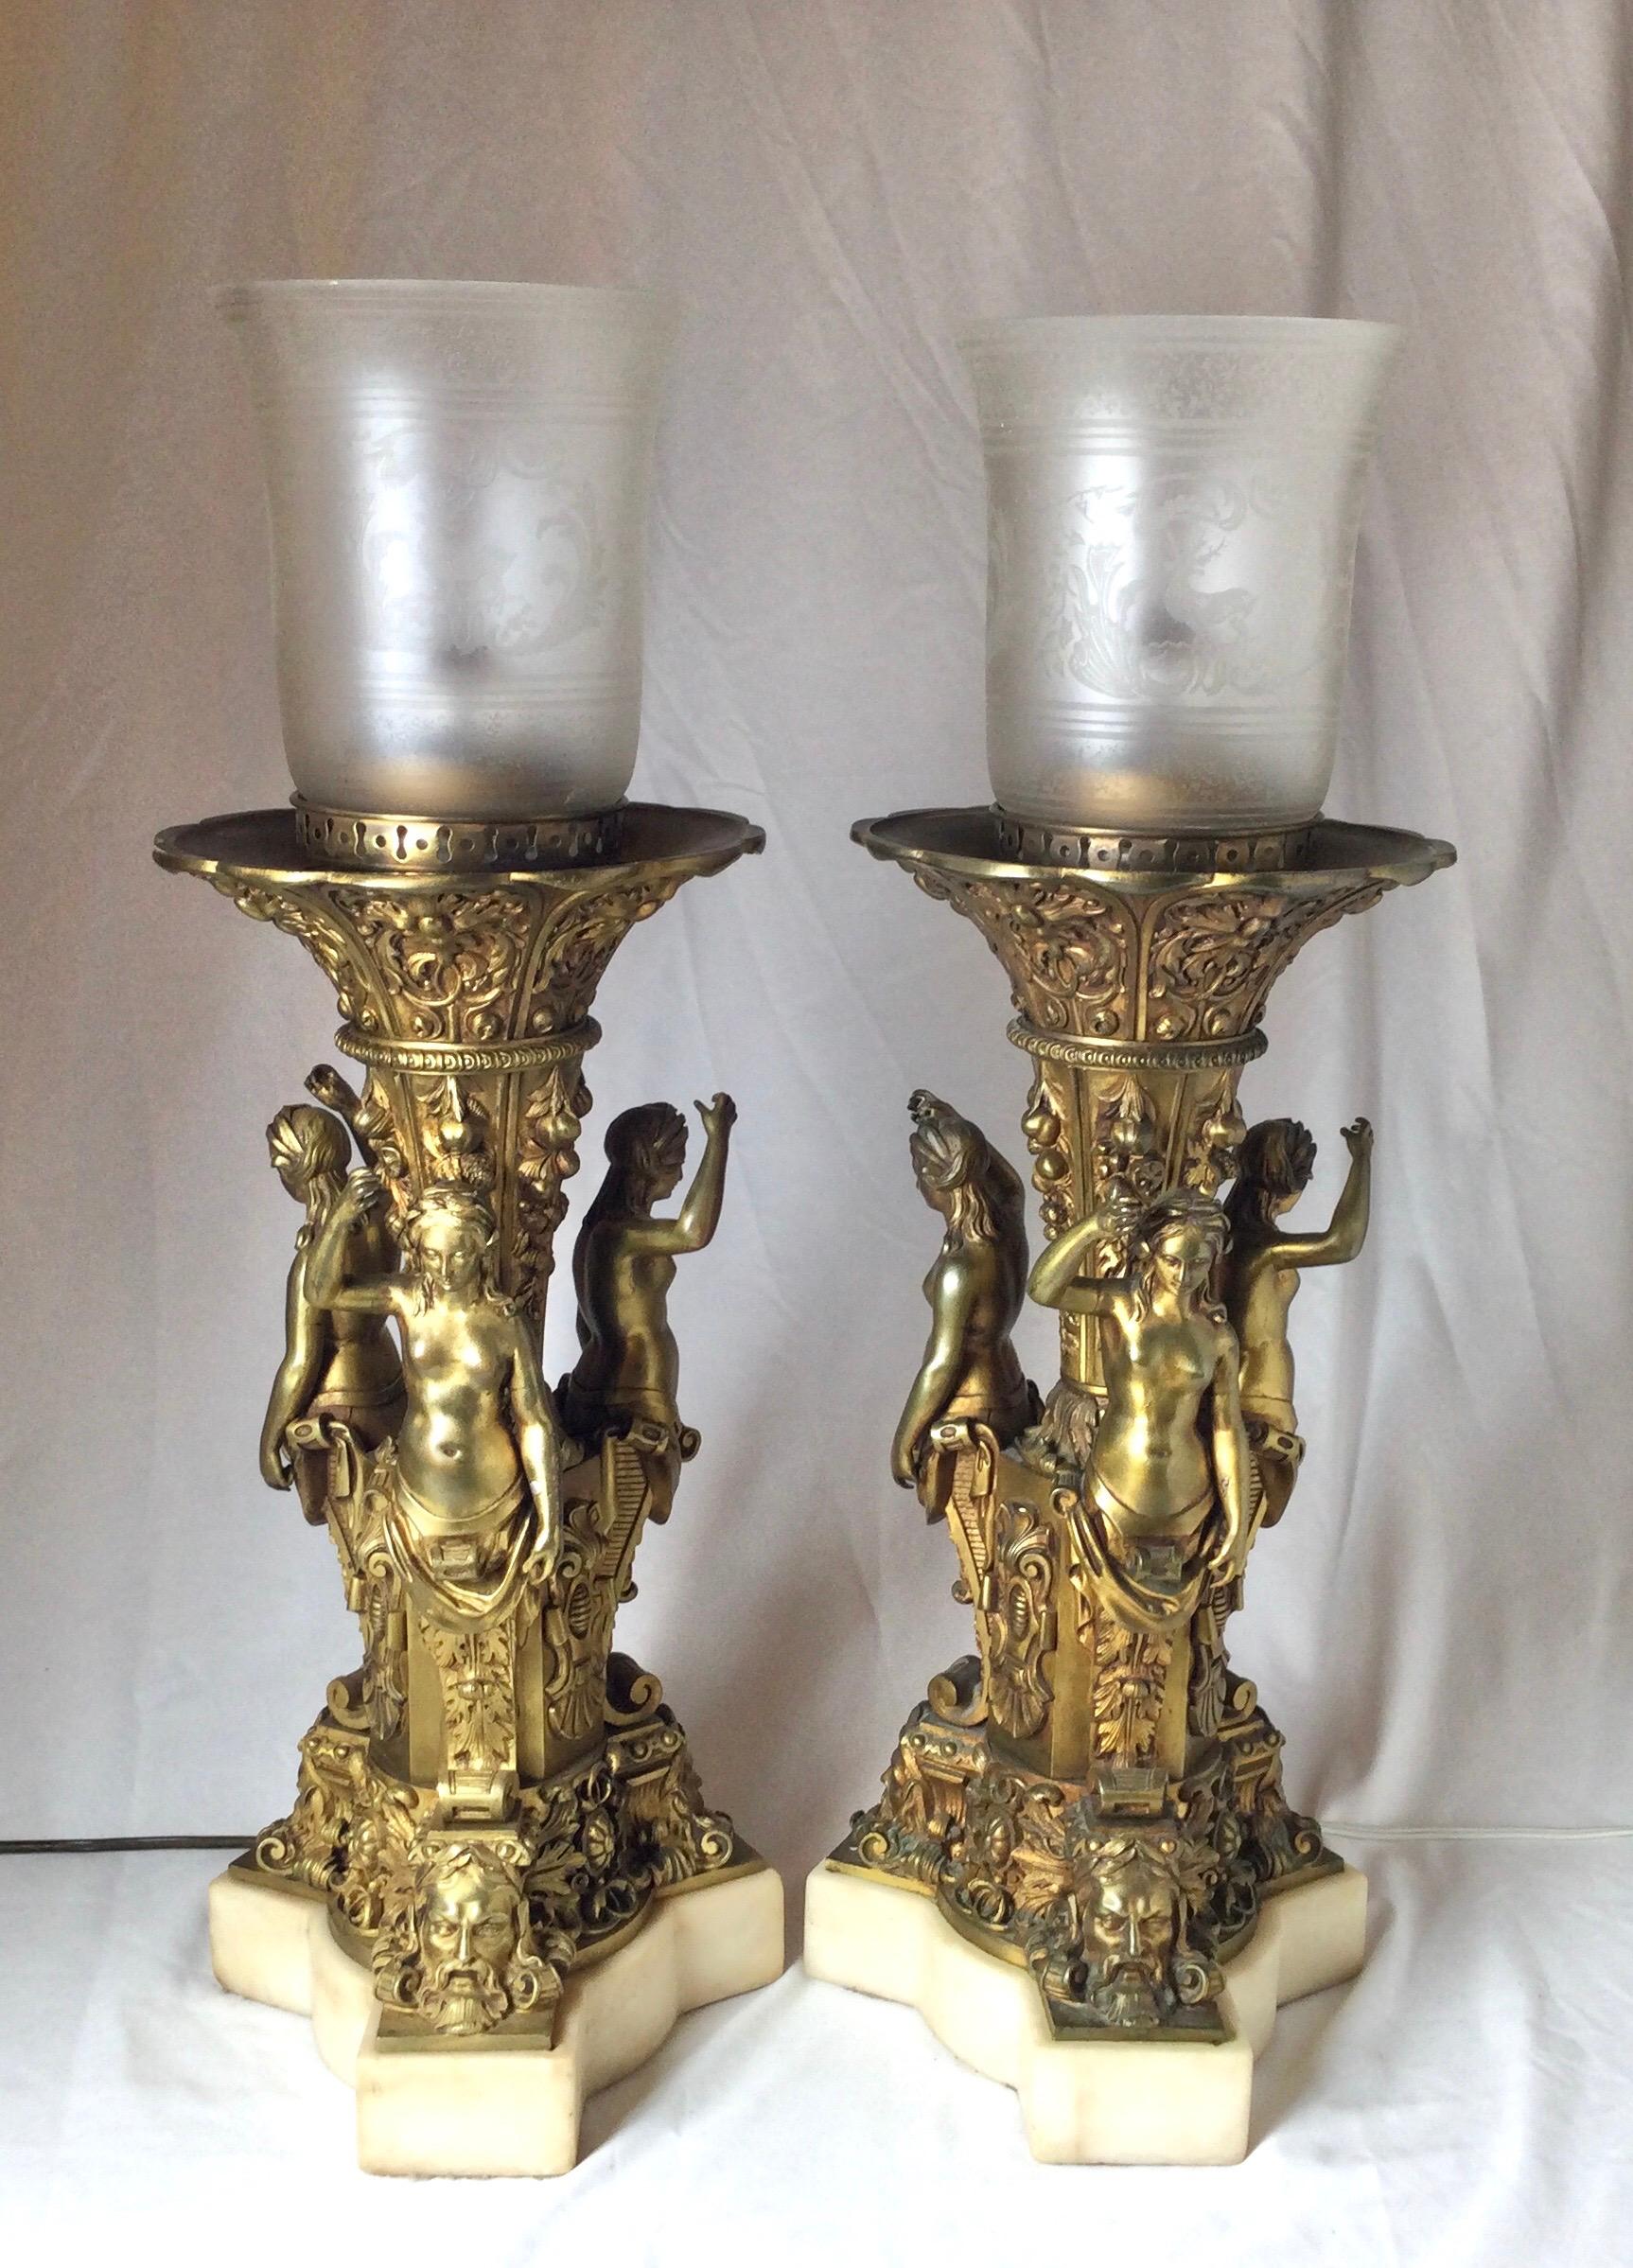 A pair of gilt bronze figural neoclassical lamps with marble bases. The bronzes with gilt surface showing wear but original. The off white marble bases fitted to the bronze figures. The etched glass shades soften the bulb. These can be changed to a